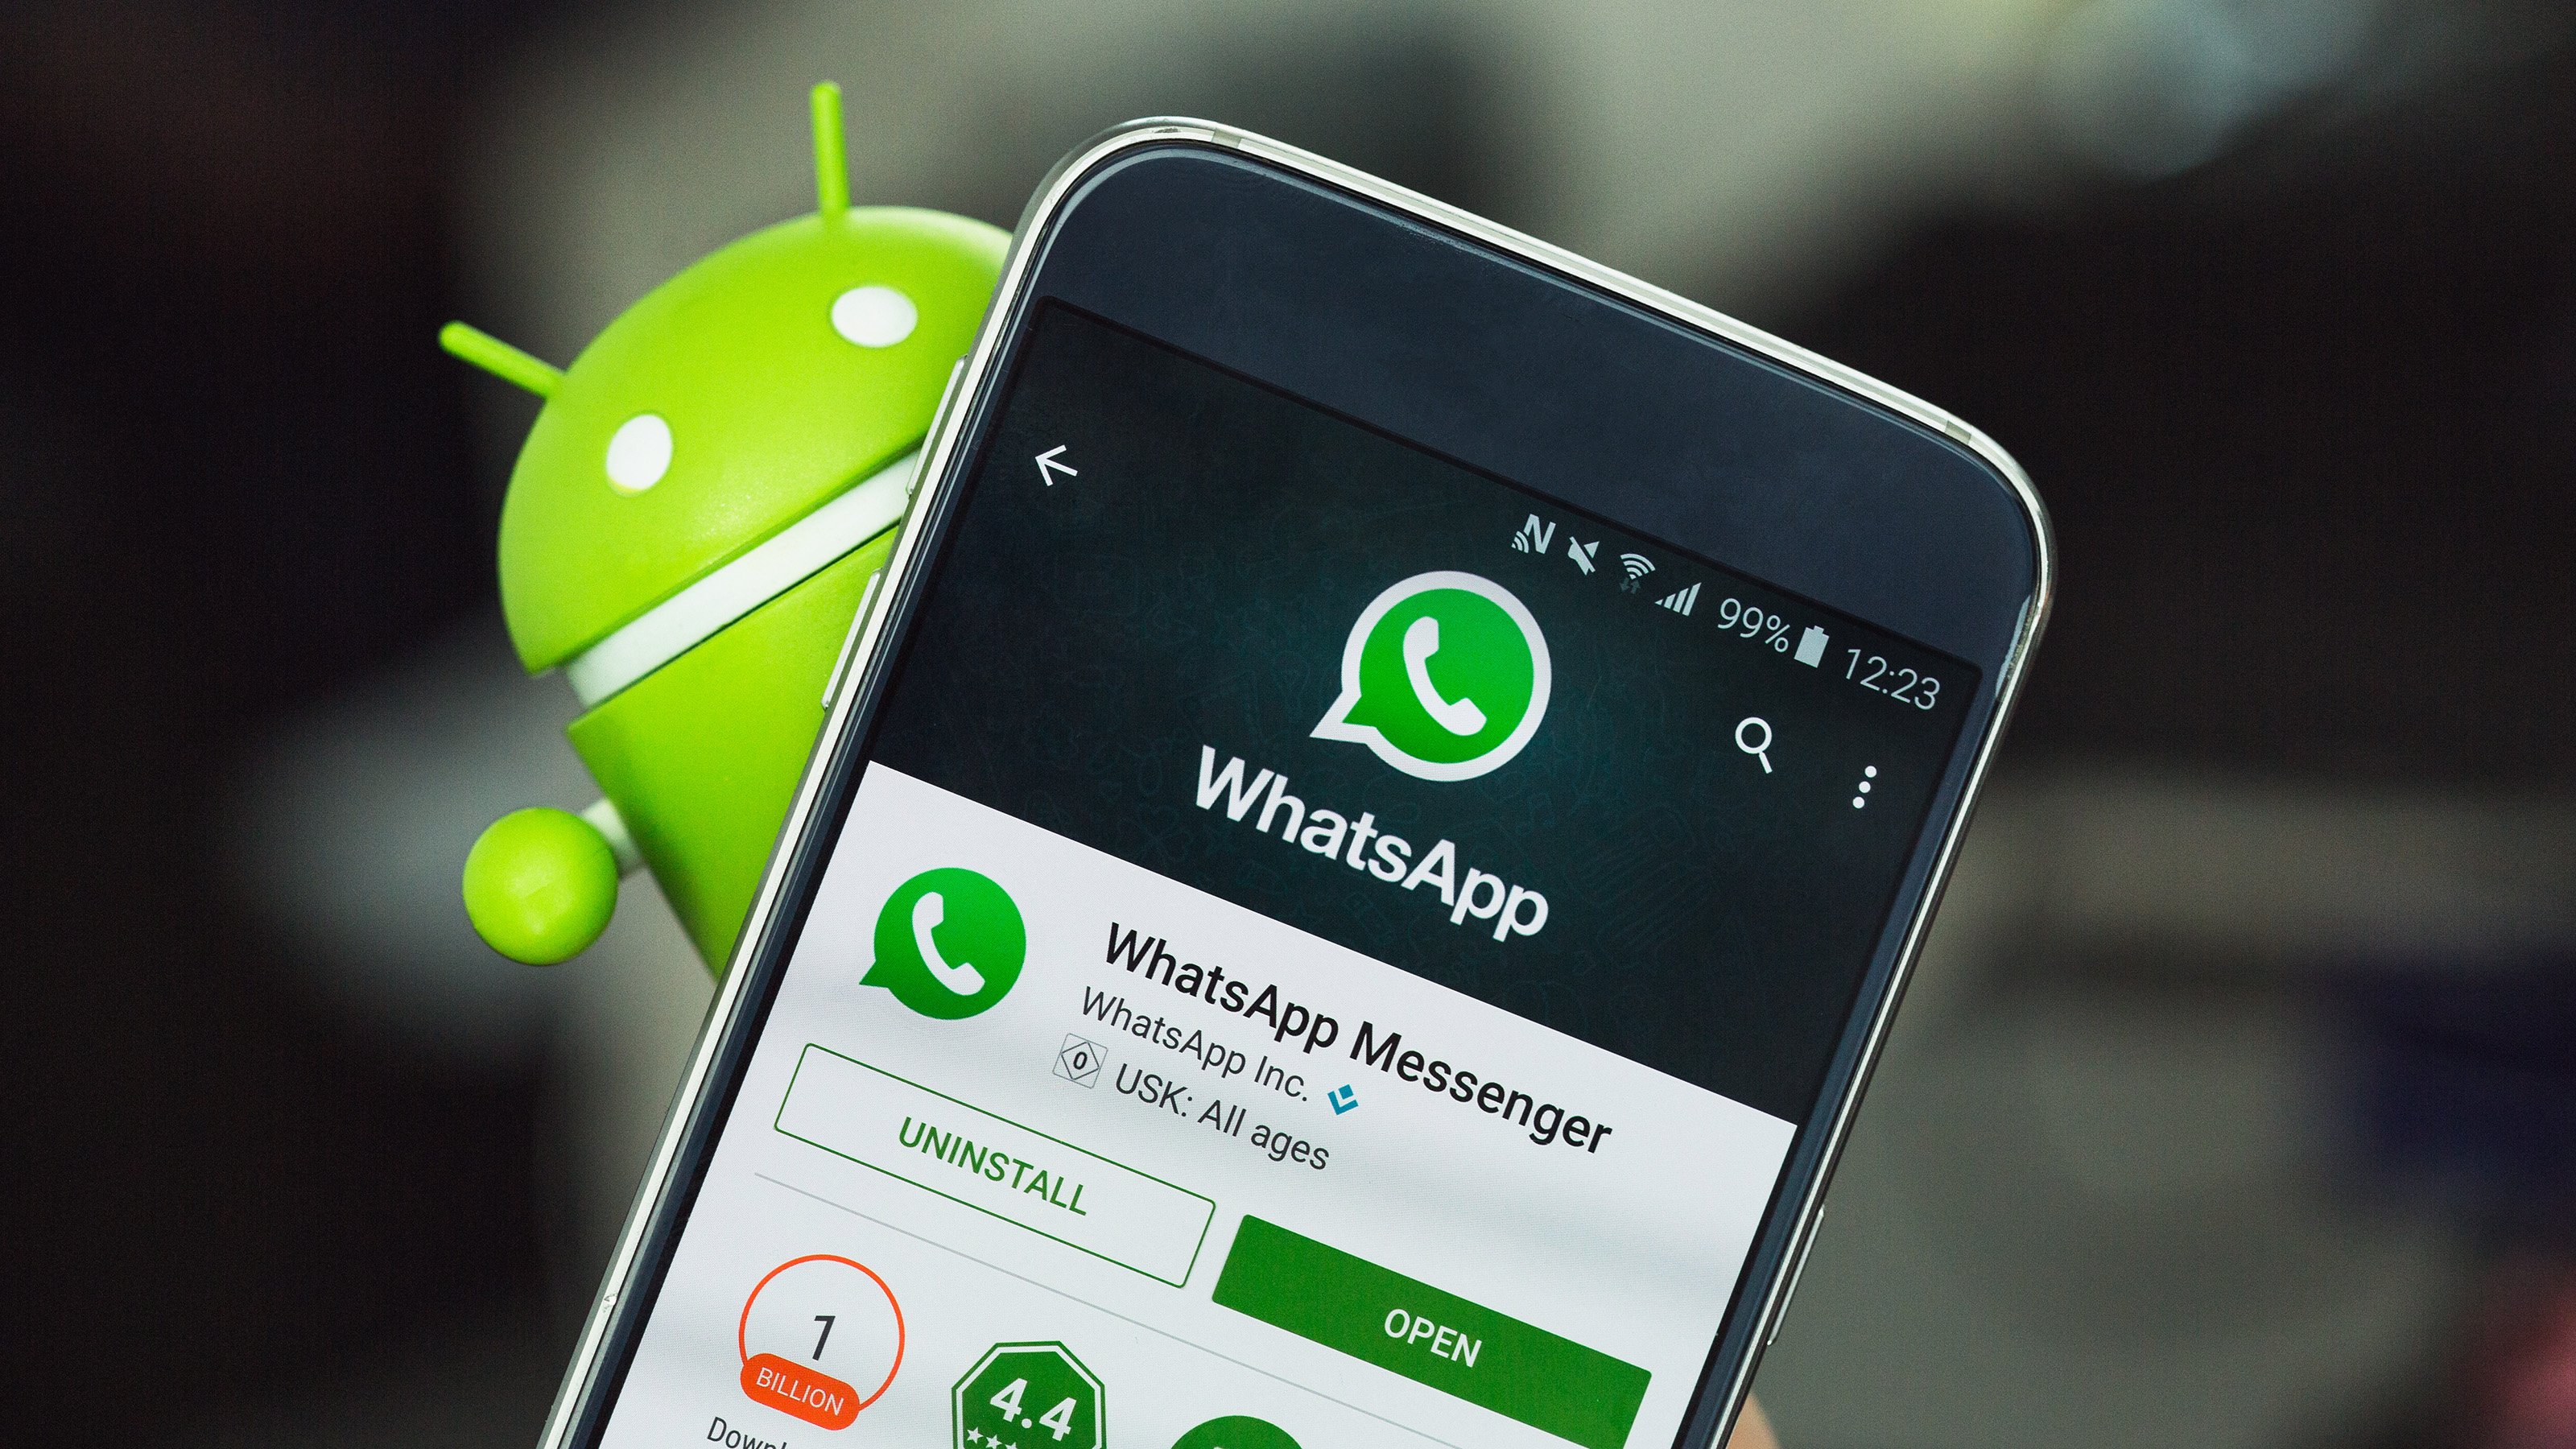 Have a problem with WhatsApp? Here are the solutions ...